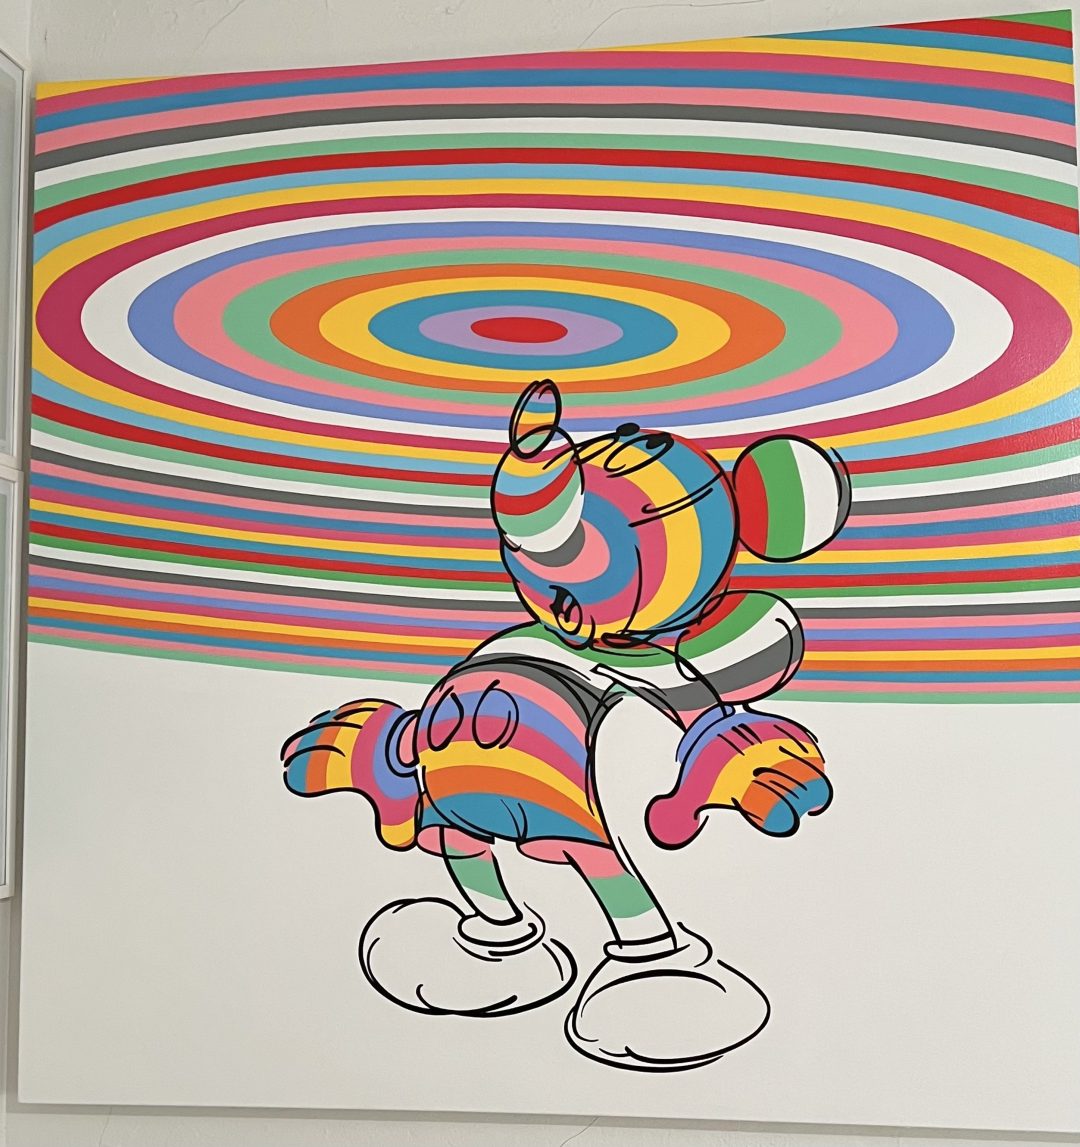 Mickey-colors 02. 2022. acrylic on canvas. 60 x 60 in